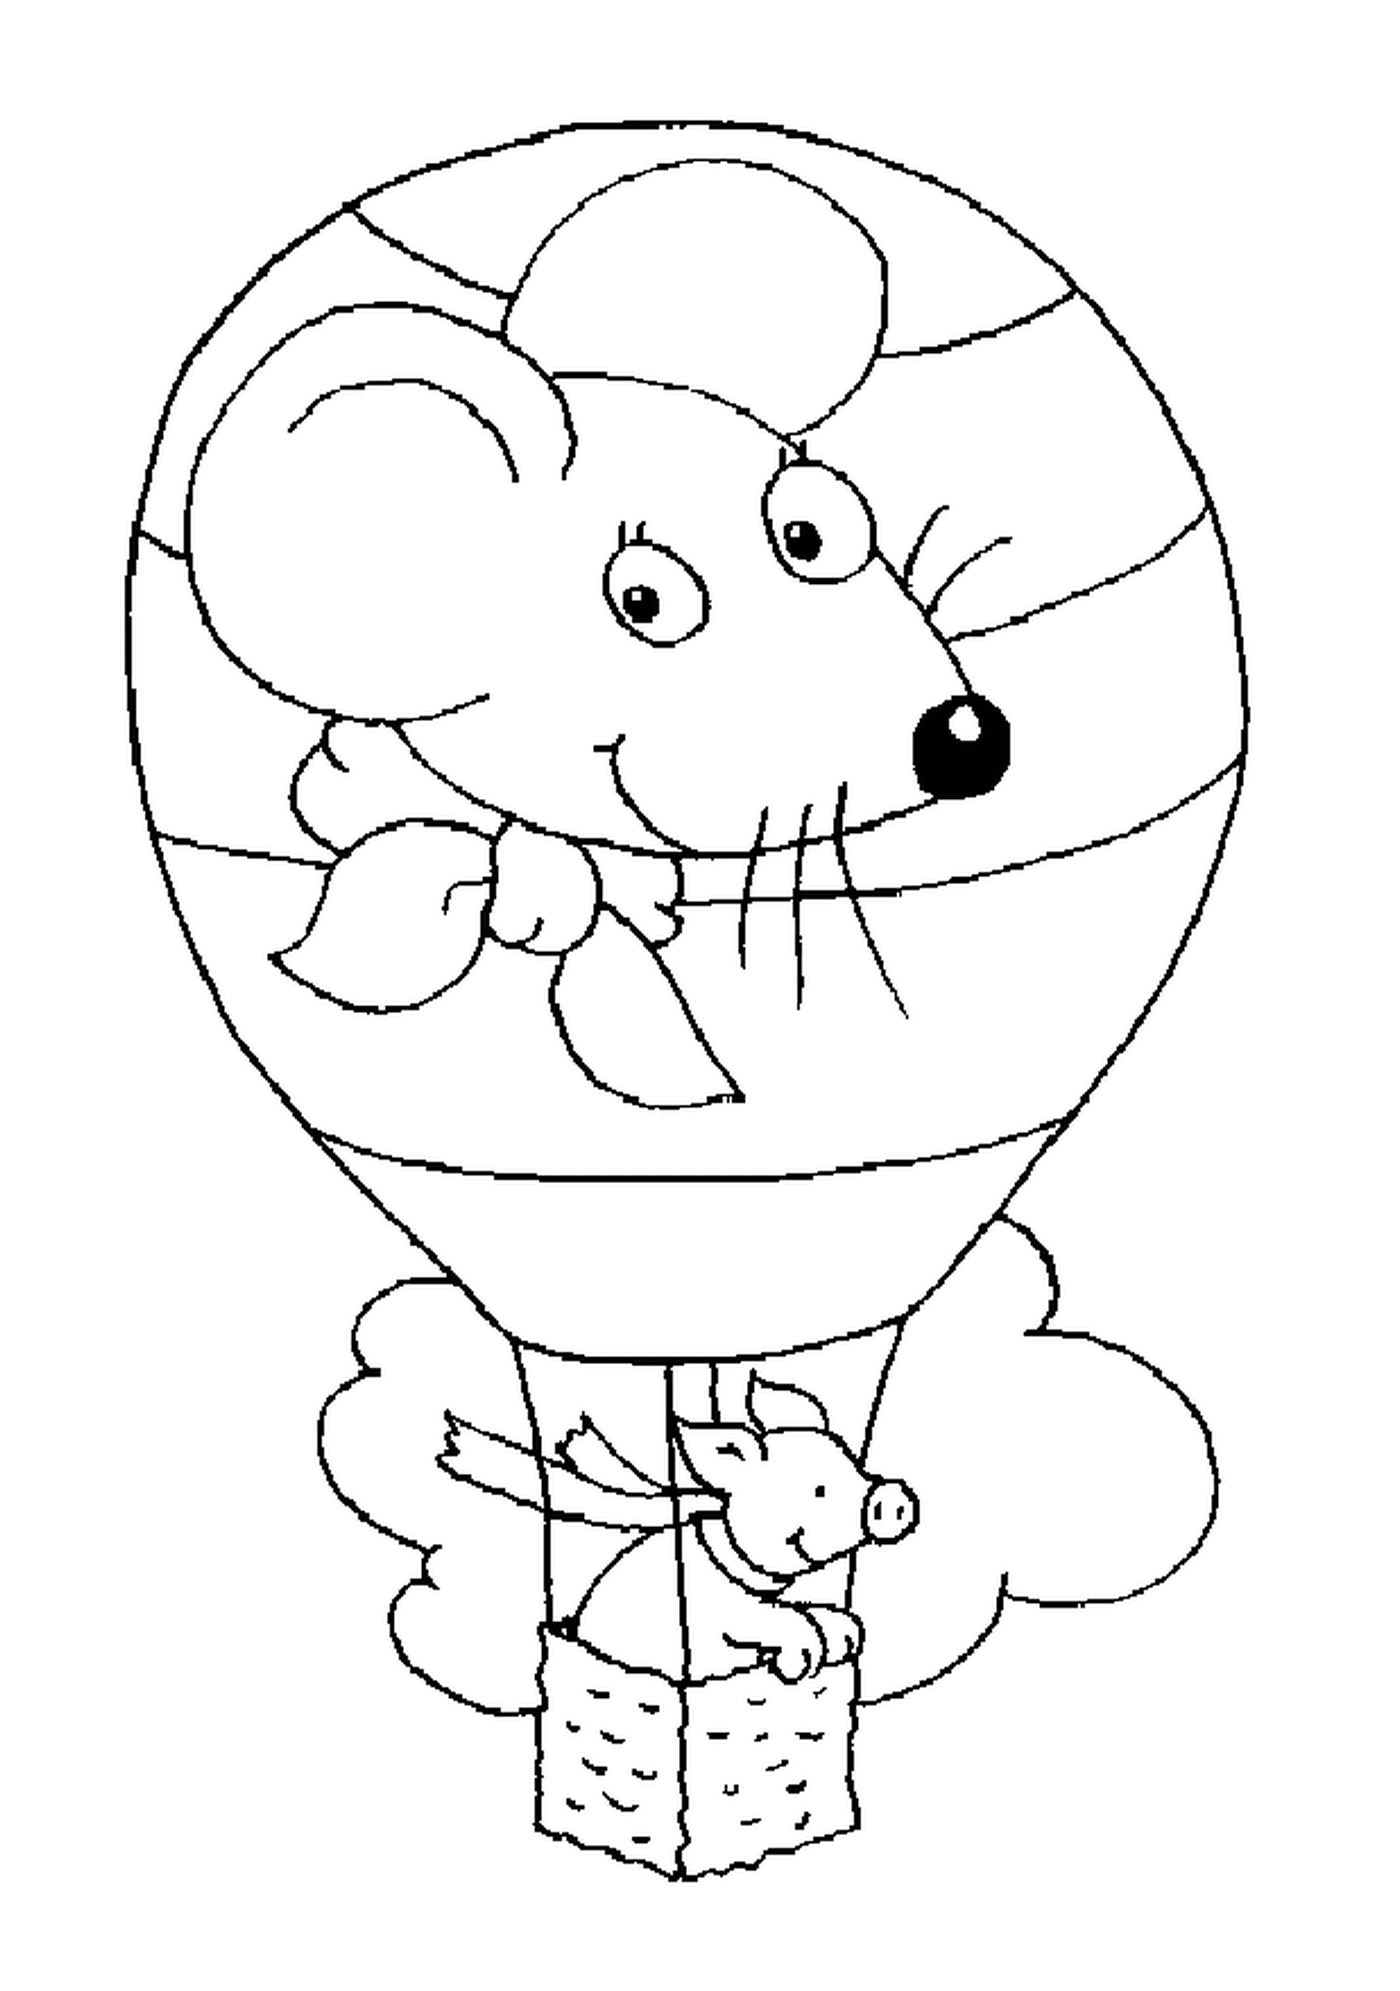  A pig in a hot air balloon with a mouse head 